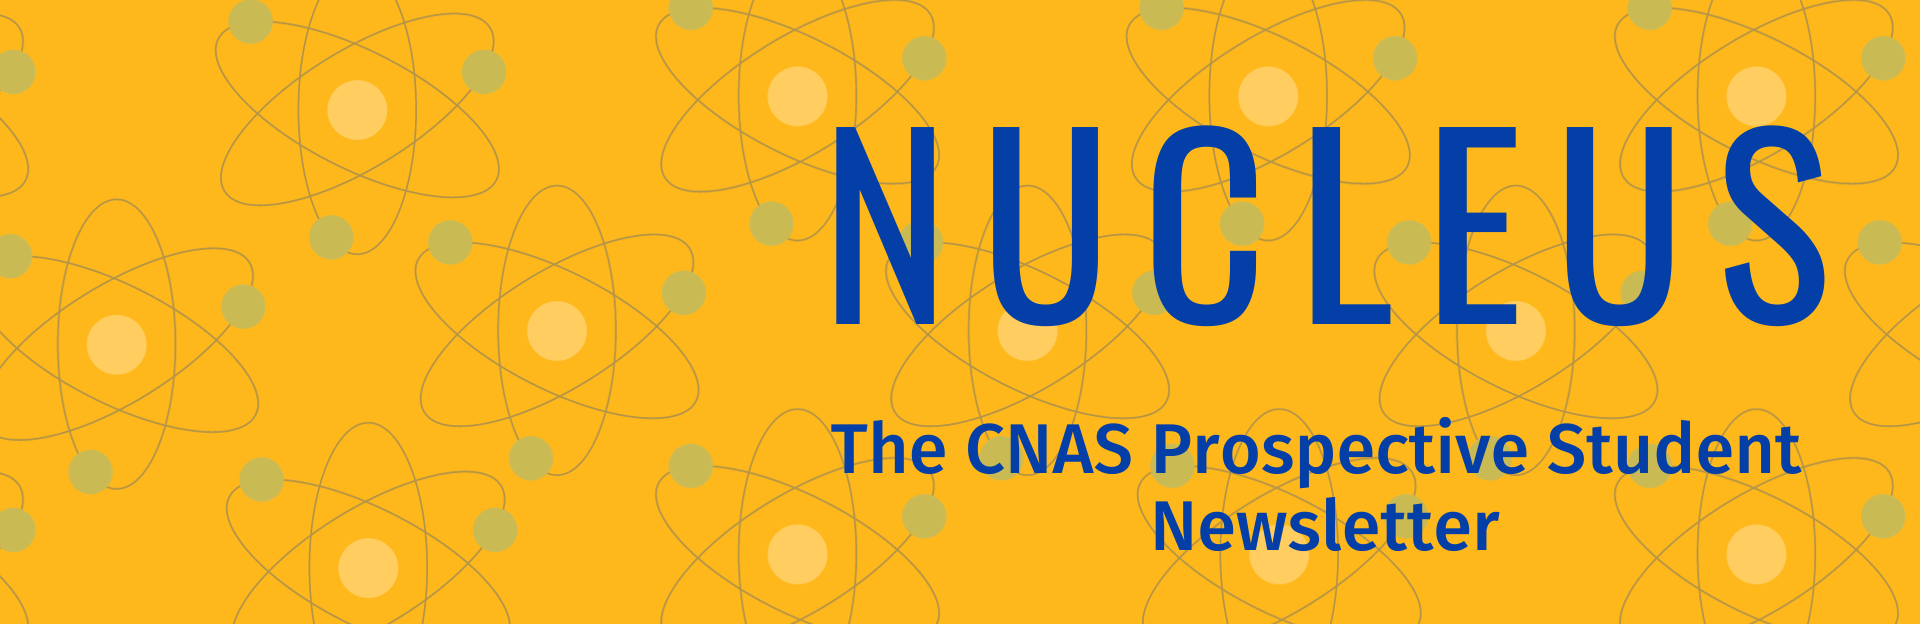 NUCLEUS Newsletter Archive